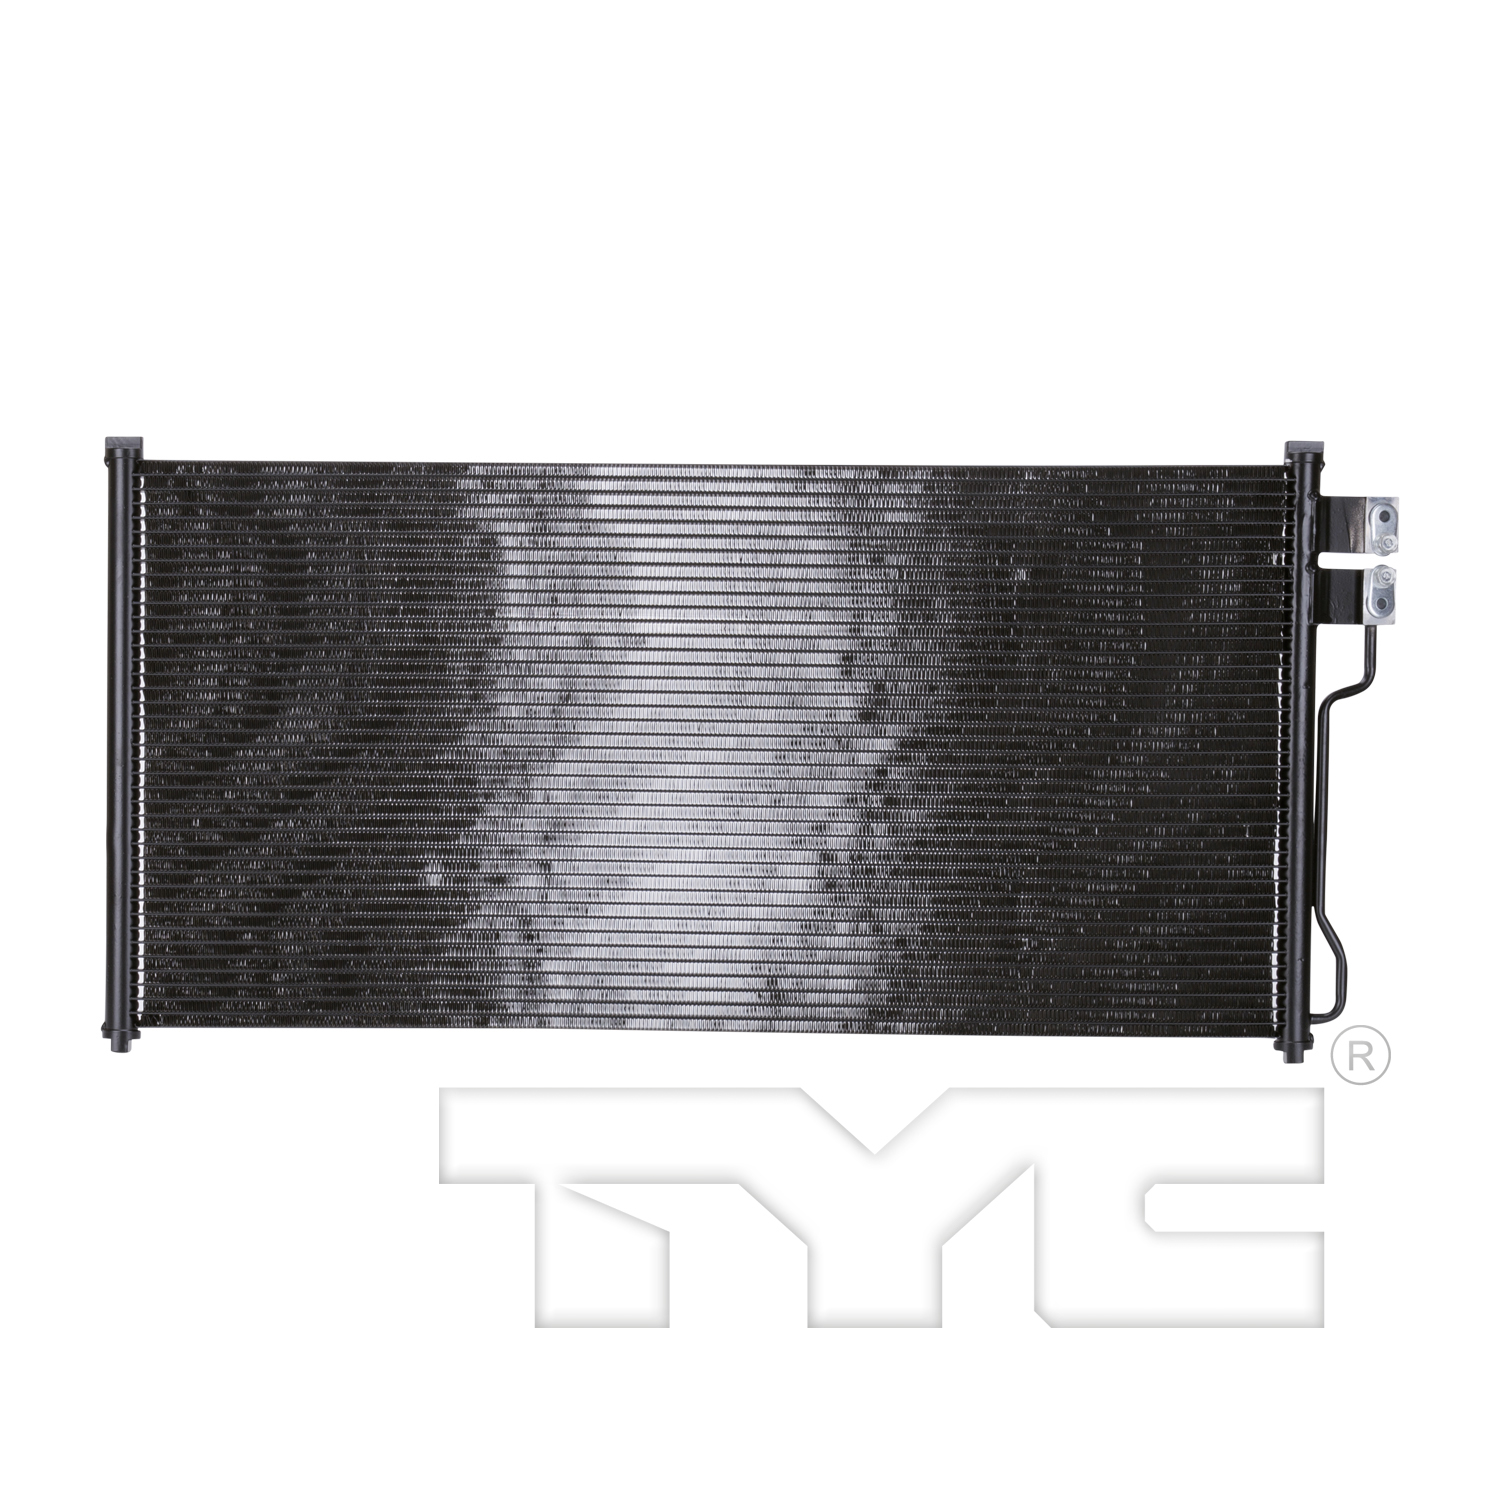 Aftermarket AC CONDENSERS for FORD - EXPEDITION, EXPEDITION,97-06,Air conditioning condenser